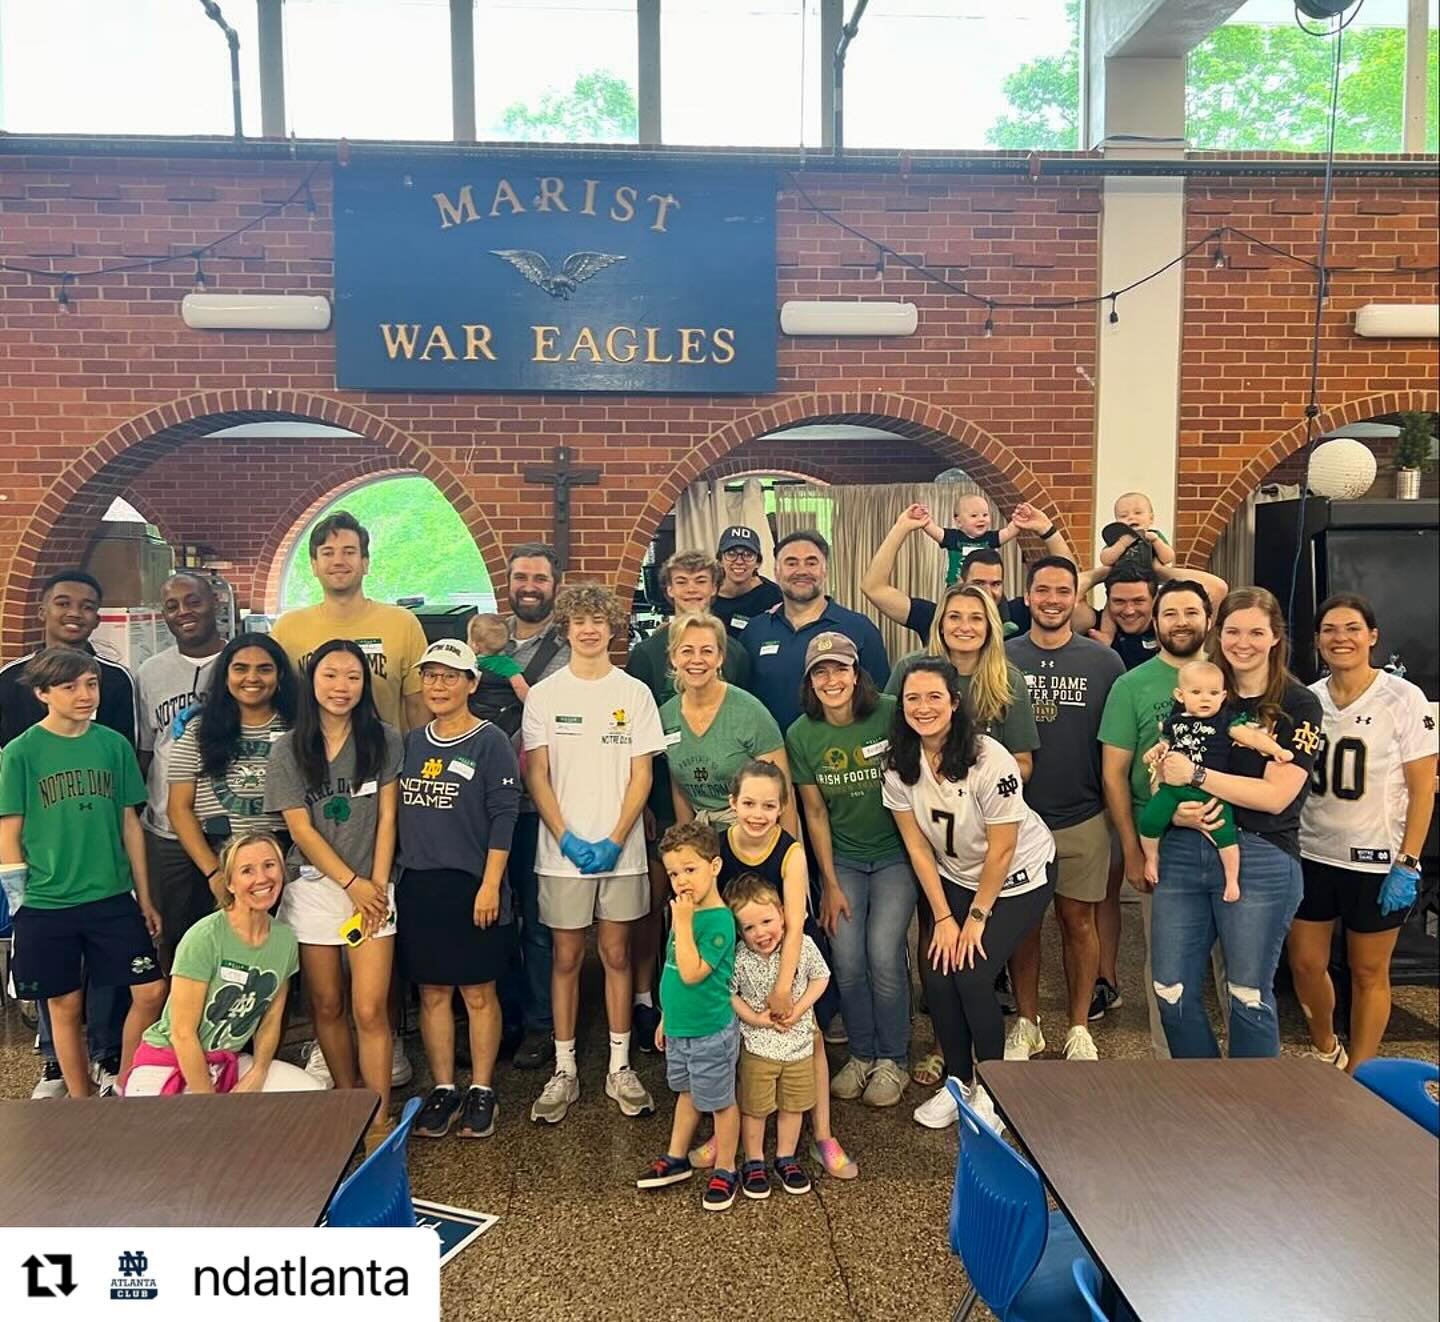 Clubs doing good! 💚 Thank you for including us in your day of service. 🙏

#Repost @ndatlanta
・・・
We were honored to join all 50 states and 29 countries participating in Notre Dame&rsquo;s 2nd annual Global Day of service. Today, we packed 500 lunch